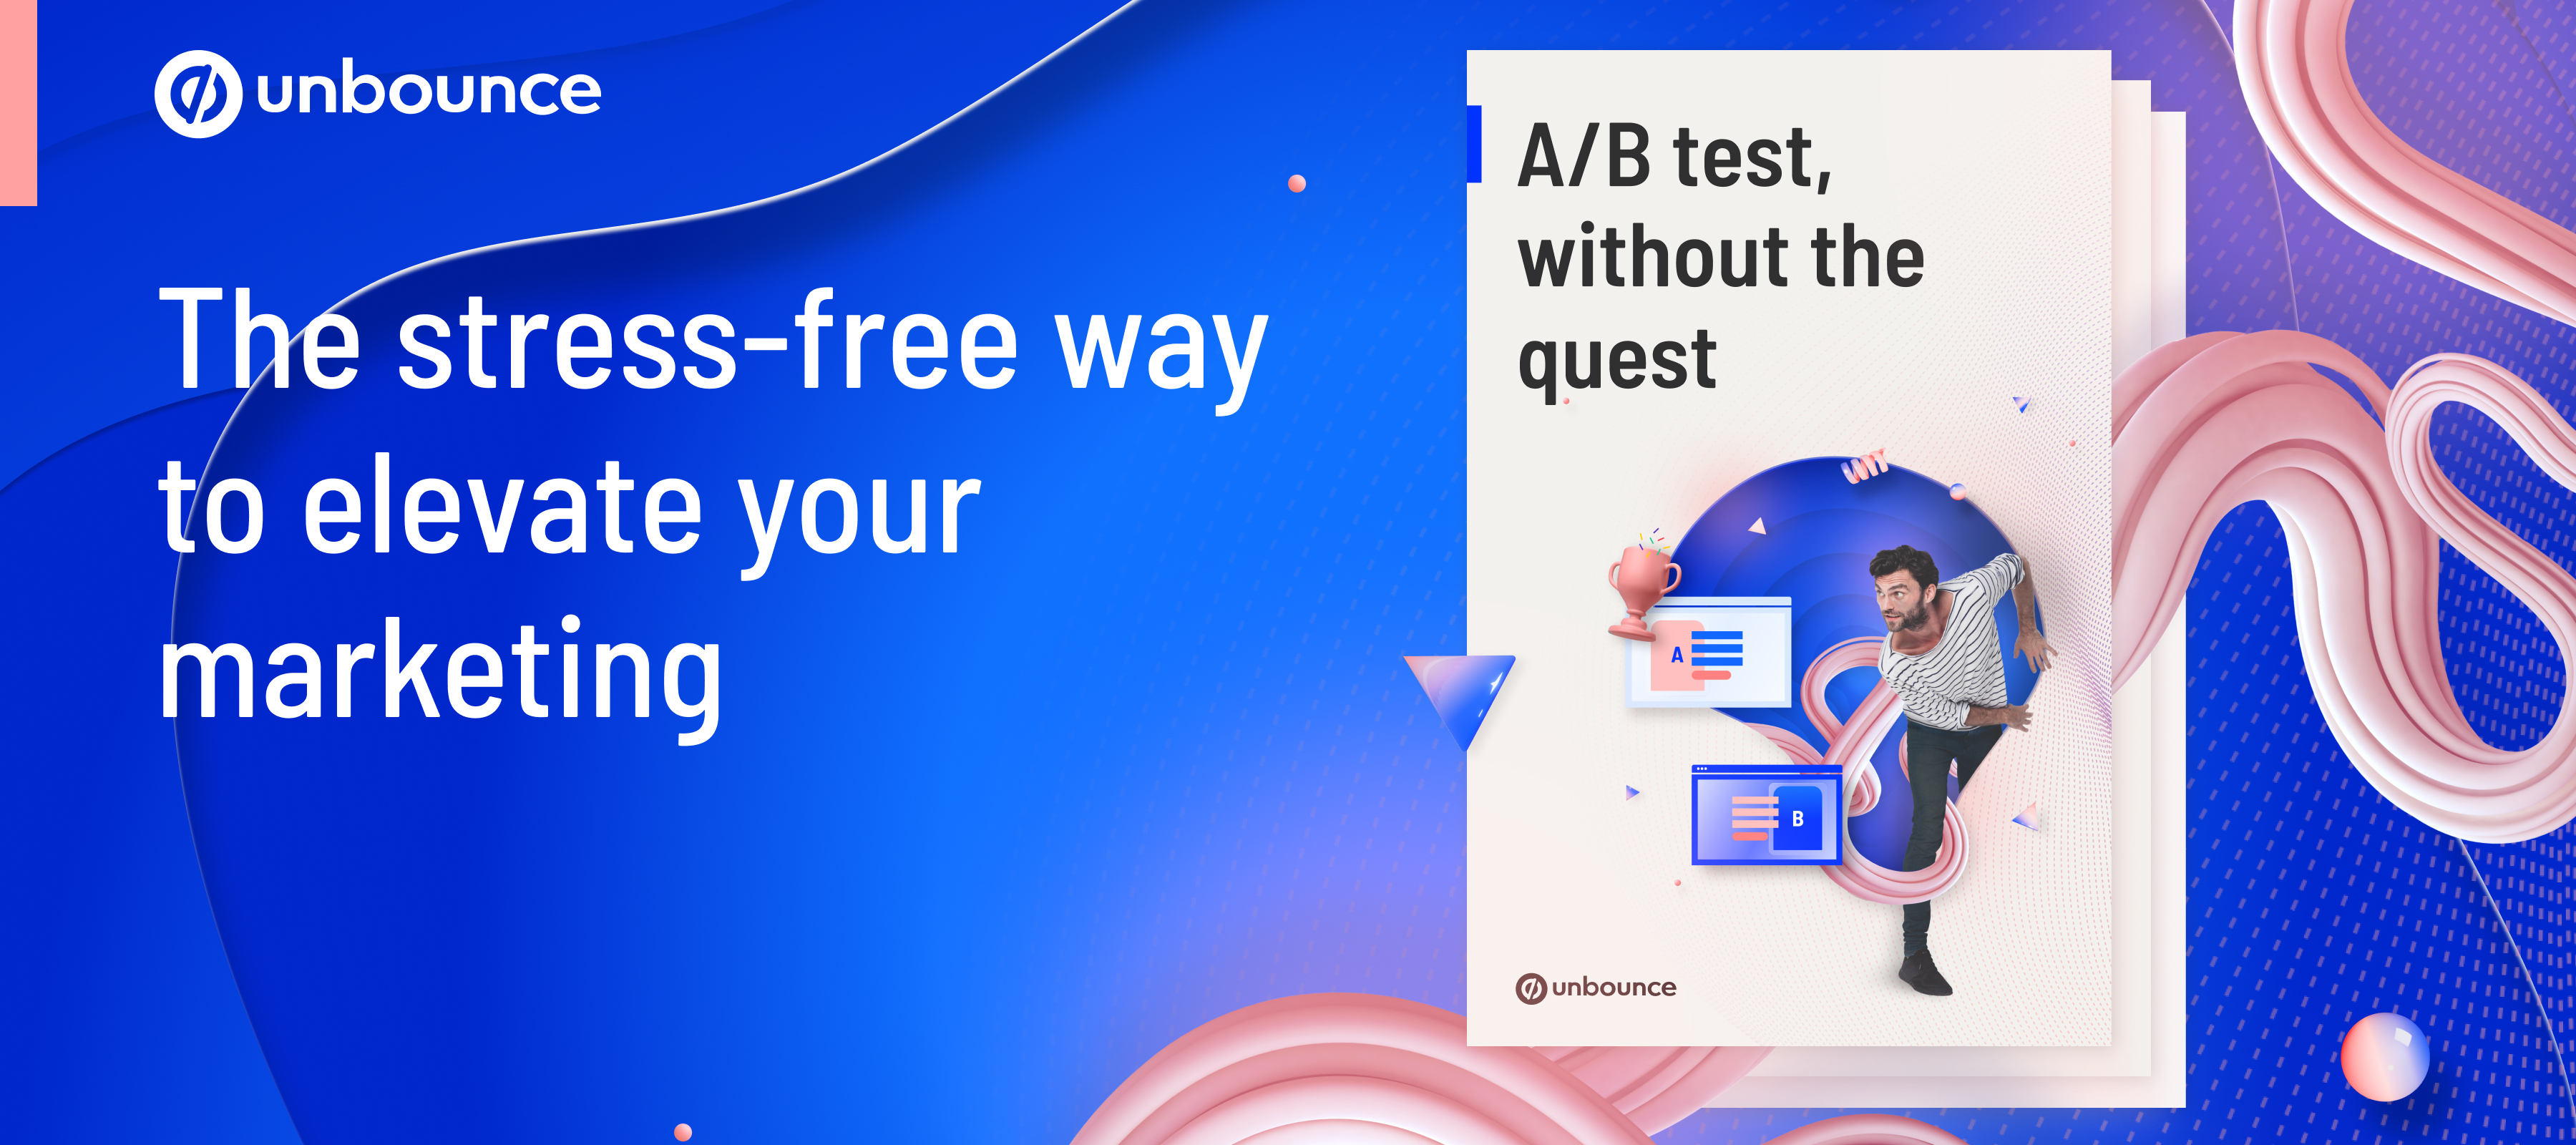 [Ebook] Achieve A/B testing success—without the stress